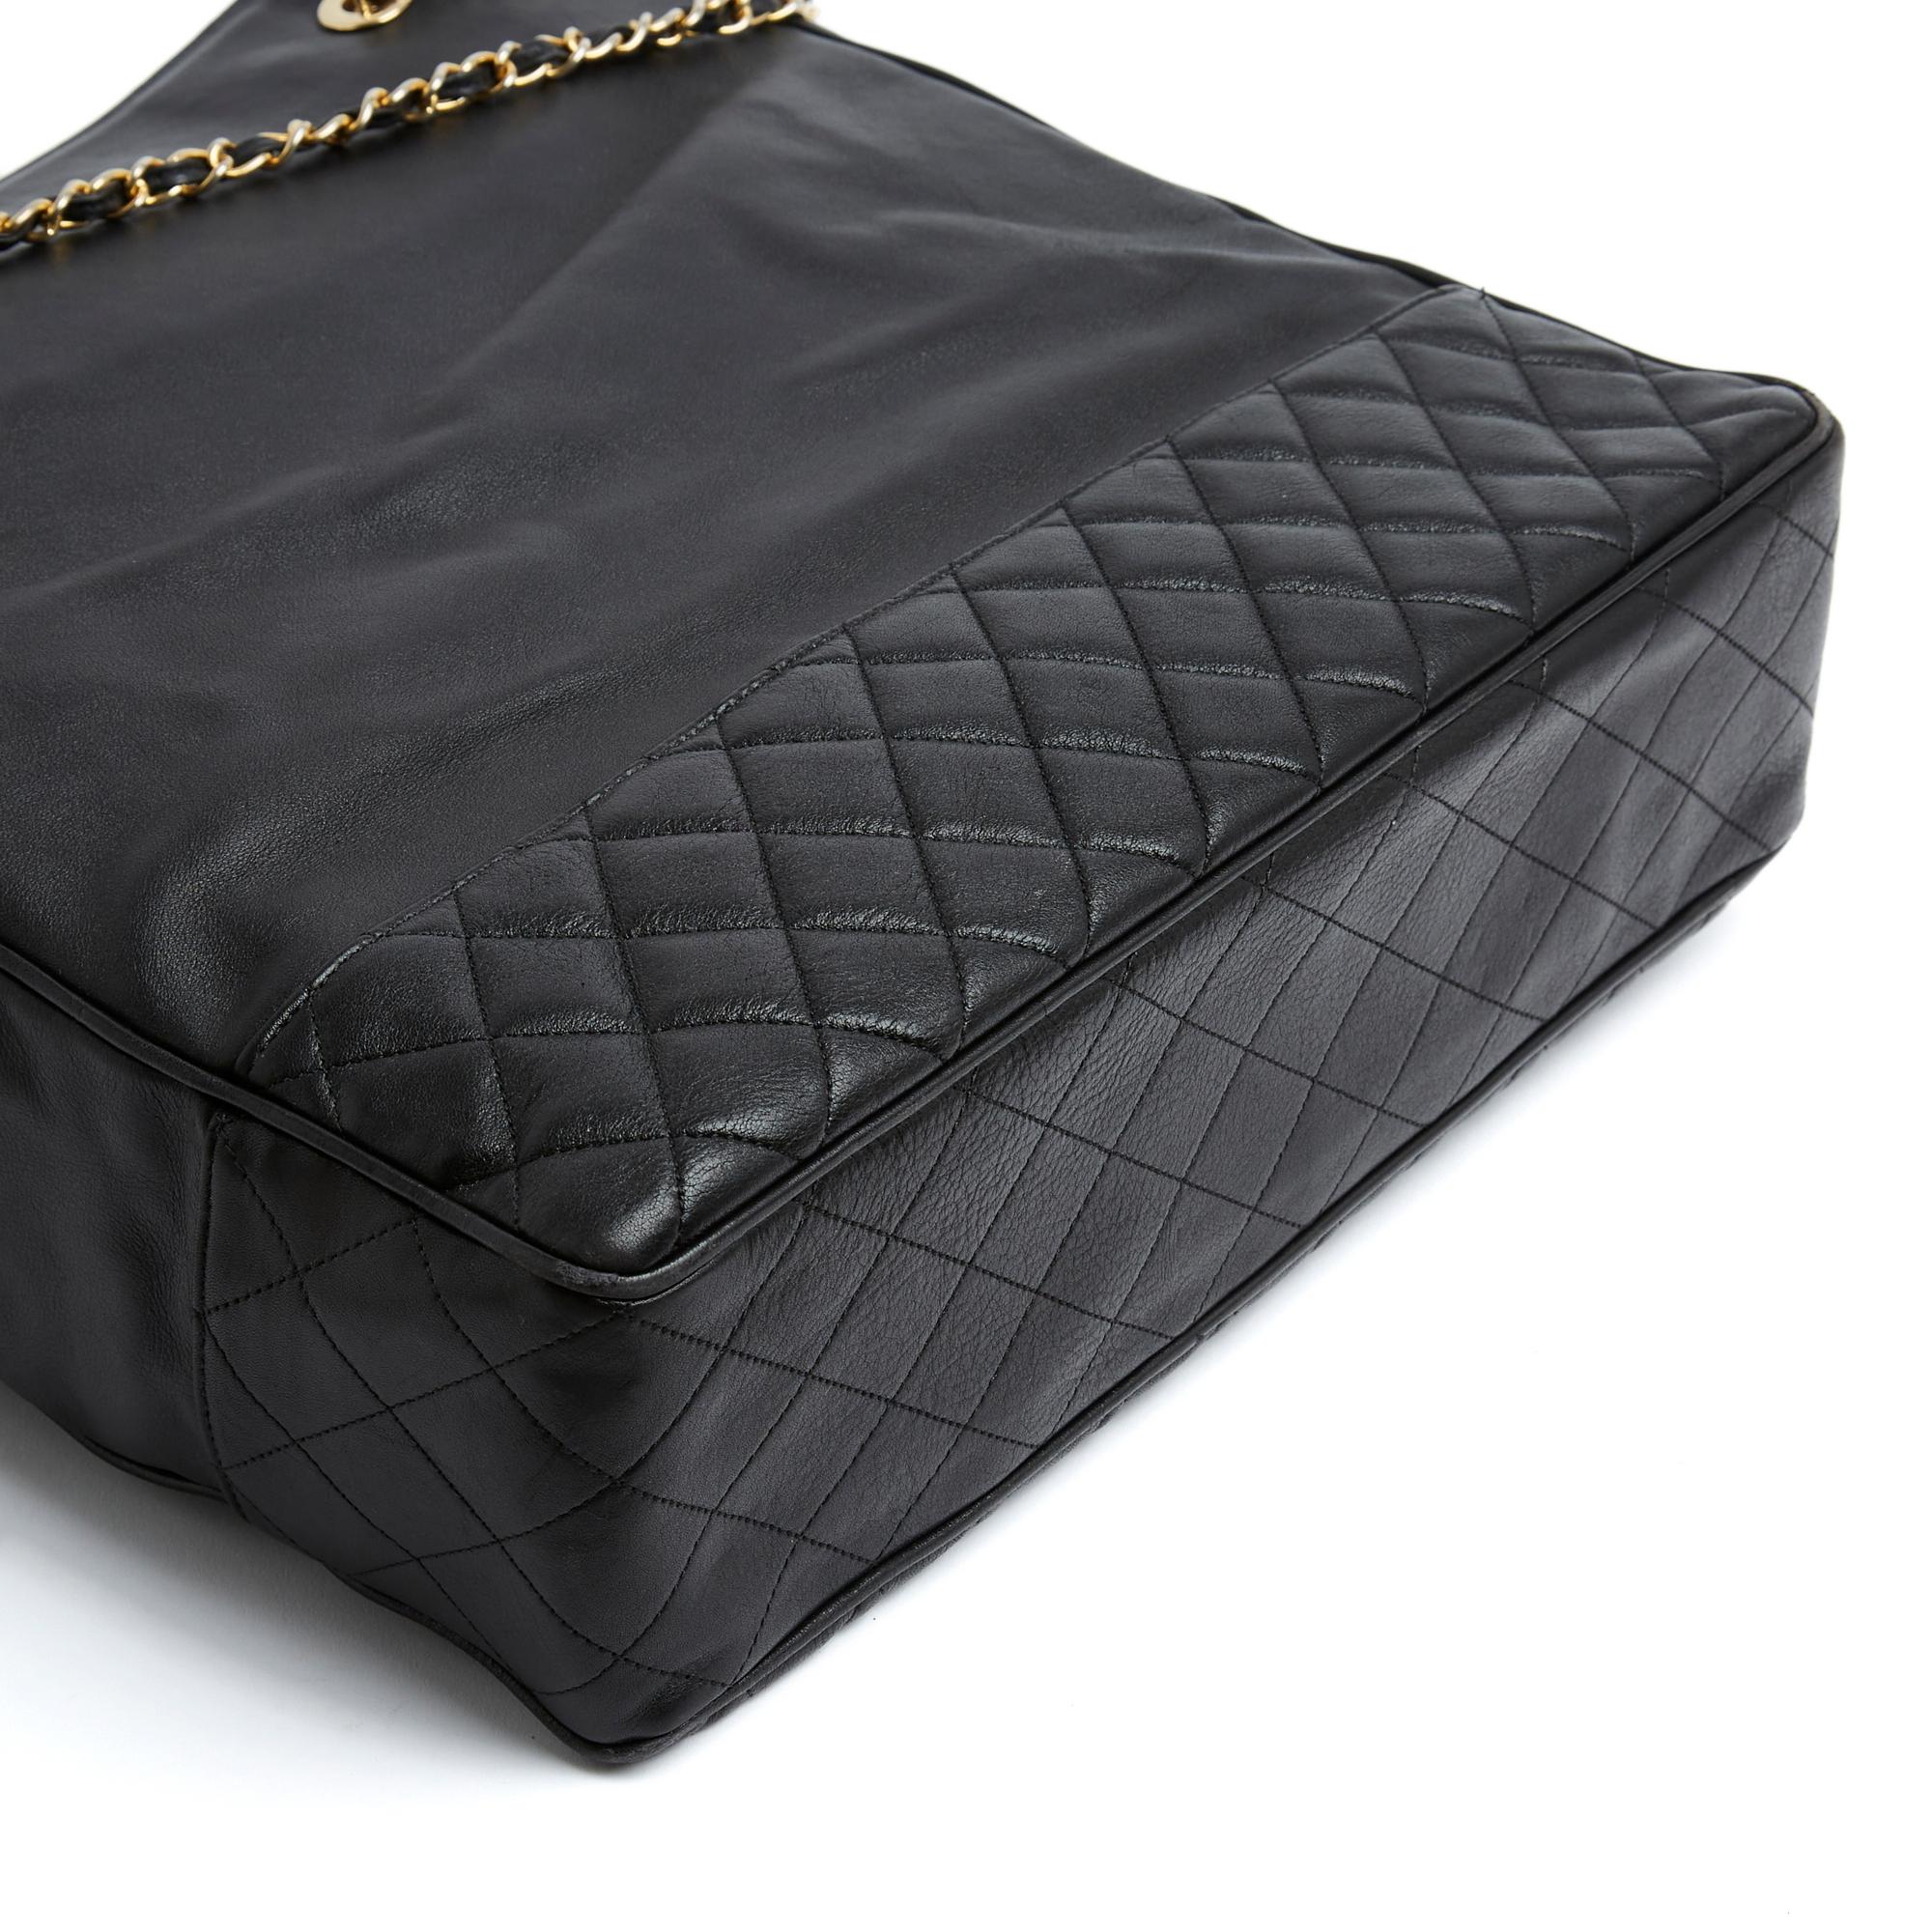 1985 Chanel Timeless Classique XL Shopping Black For Sale 2